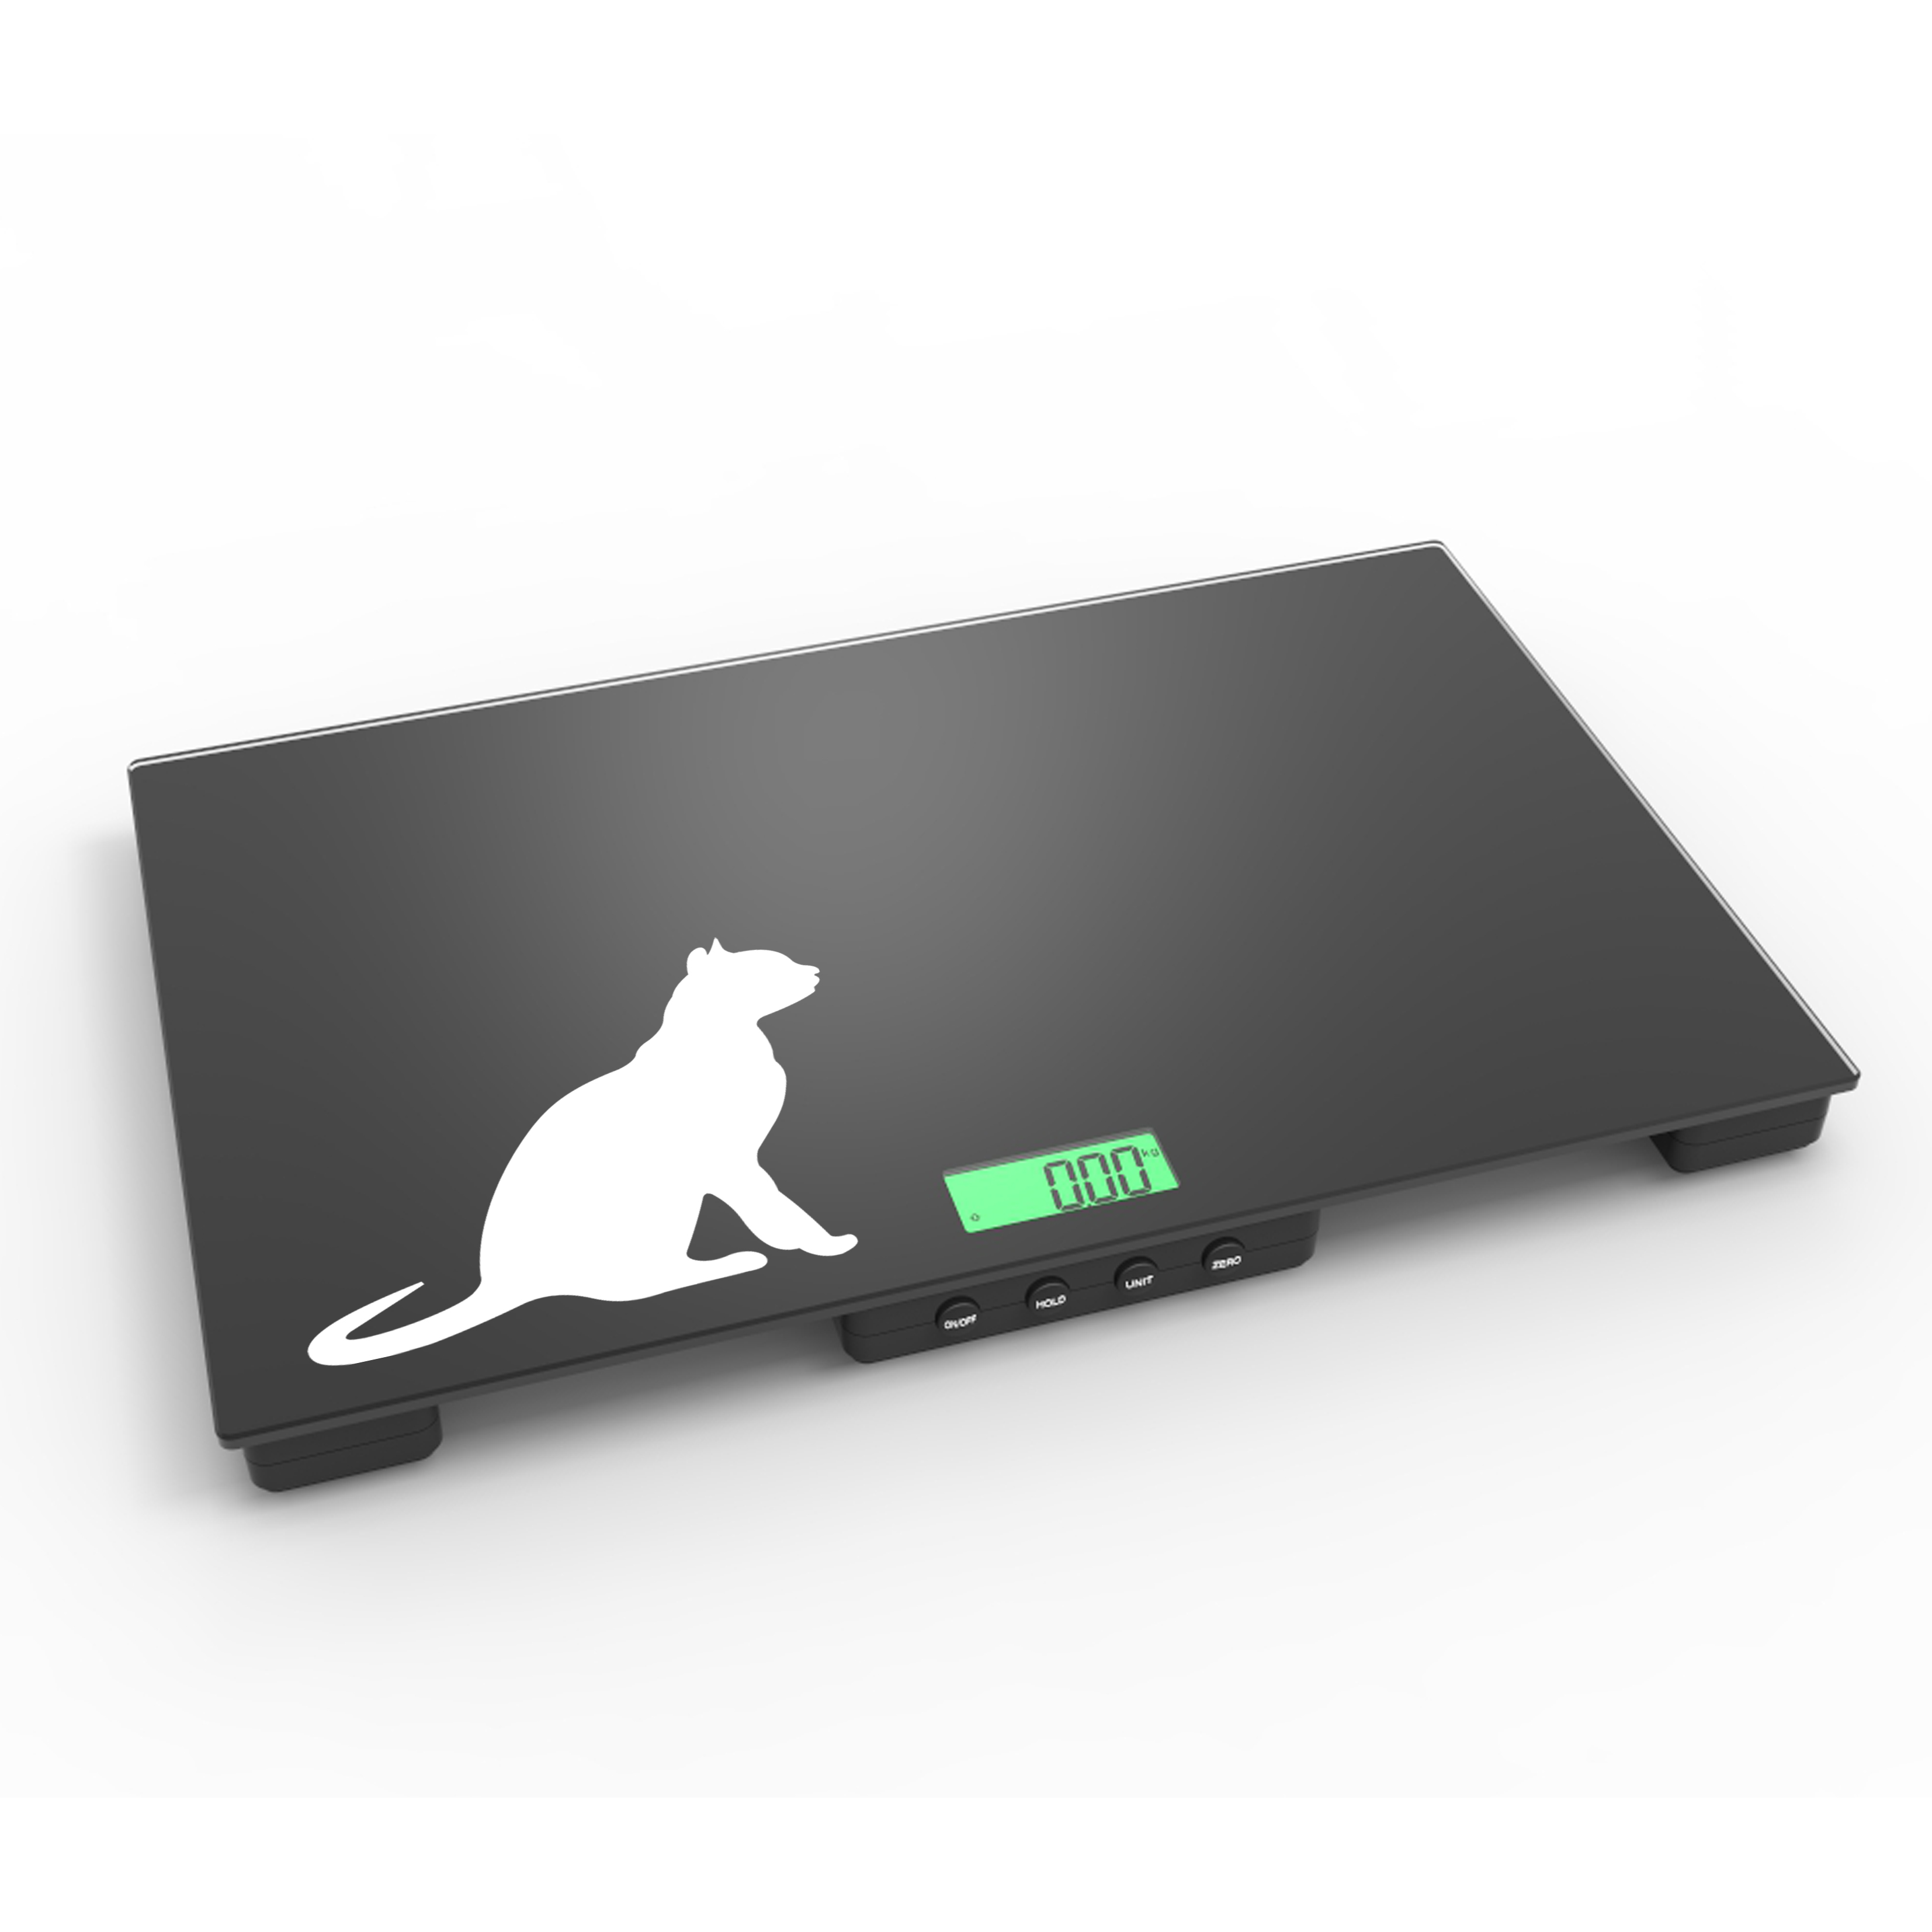 FCW-G 150kg animal weighing tempered glass pet scale weighing dog weighing cat Animal dog cat scale